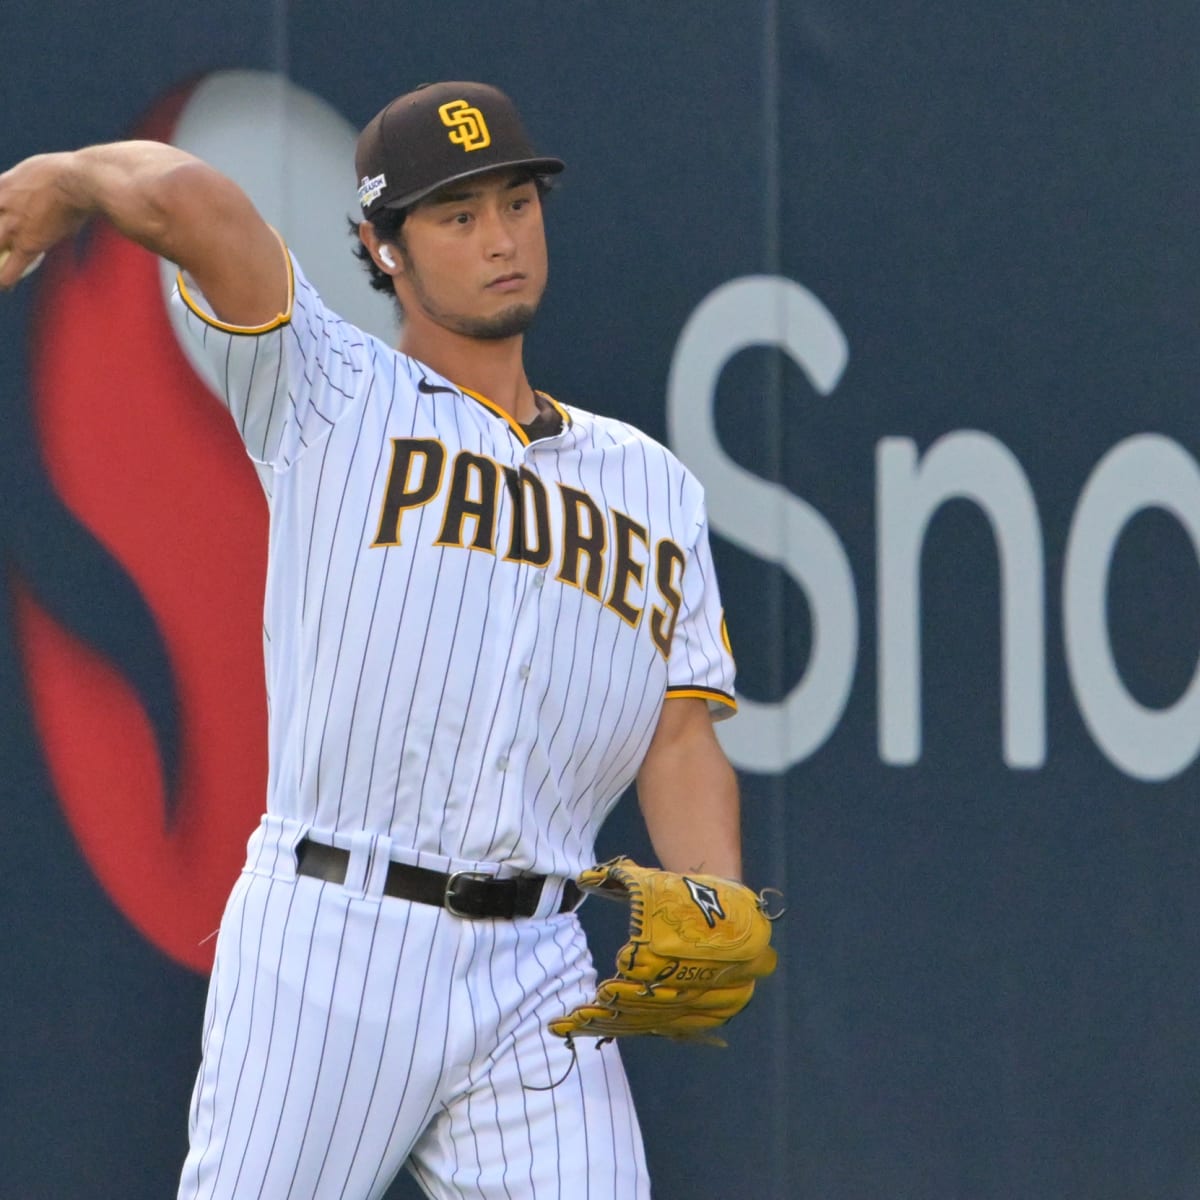 Padres News: RHP Yu Darvish May Not Be Ready For Opening Day